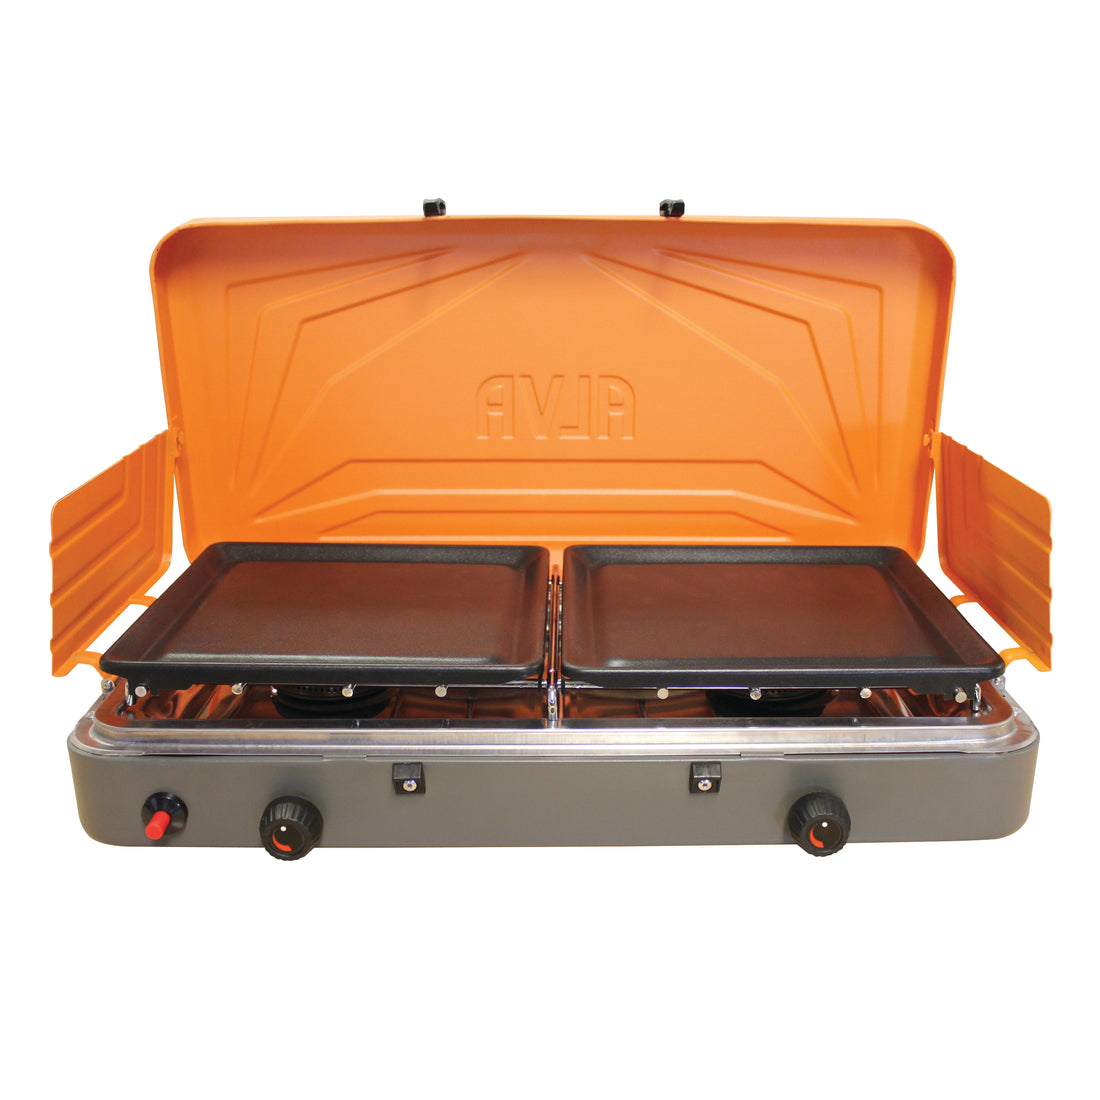 2-BURNER CAMPING STOVE WITH SOLID PLATES - ALL-IN-1 SUITCASE